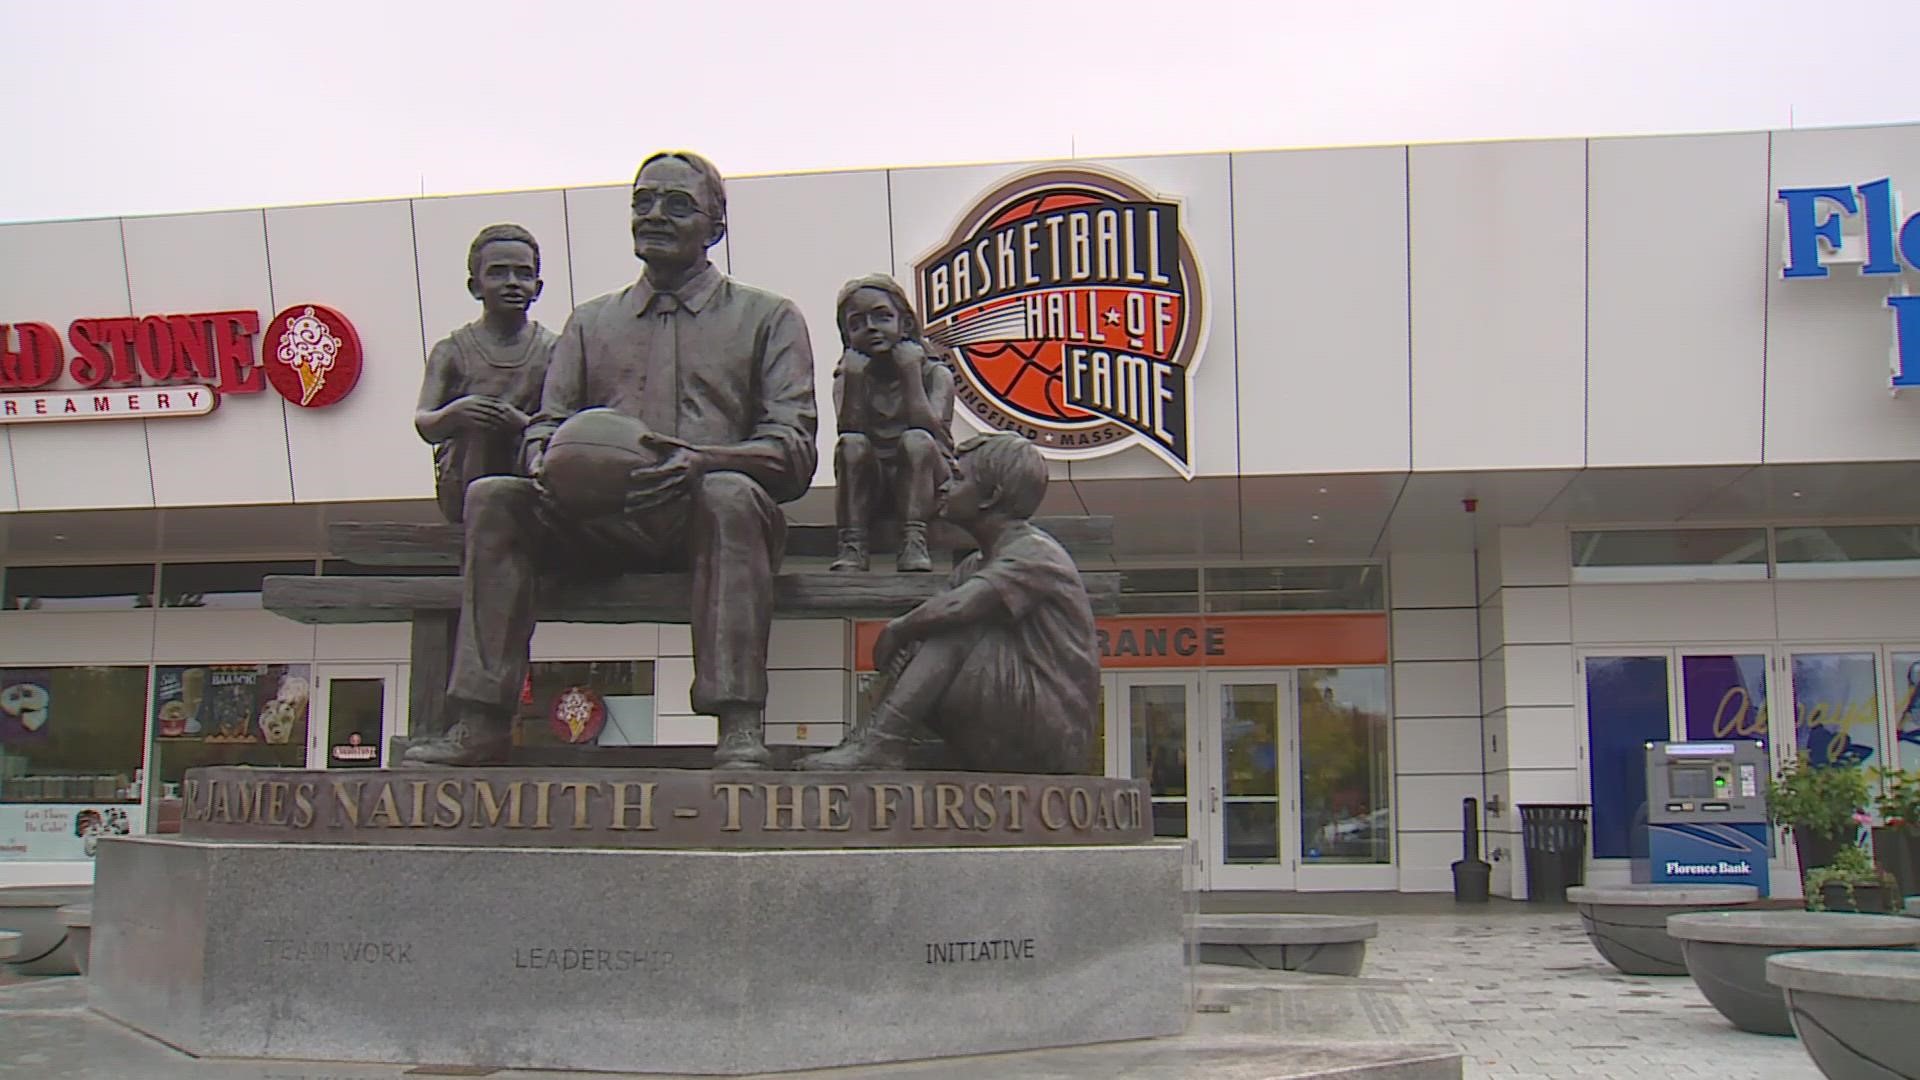 The Naismith Memorial Basketball Hall of Fame has recently completed a $25-million capital campaign to upgrade the entire facility.